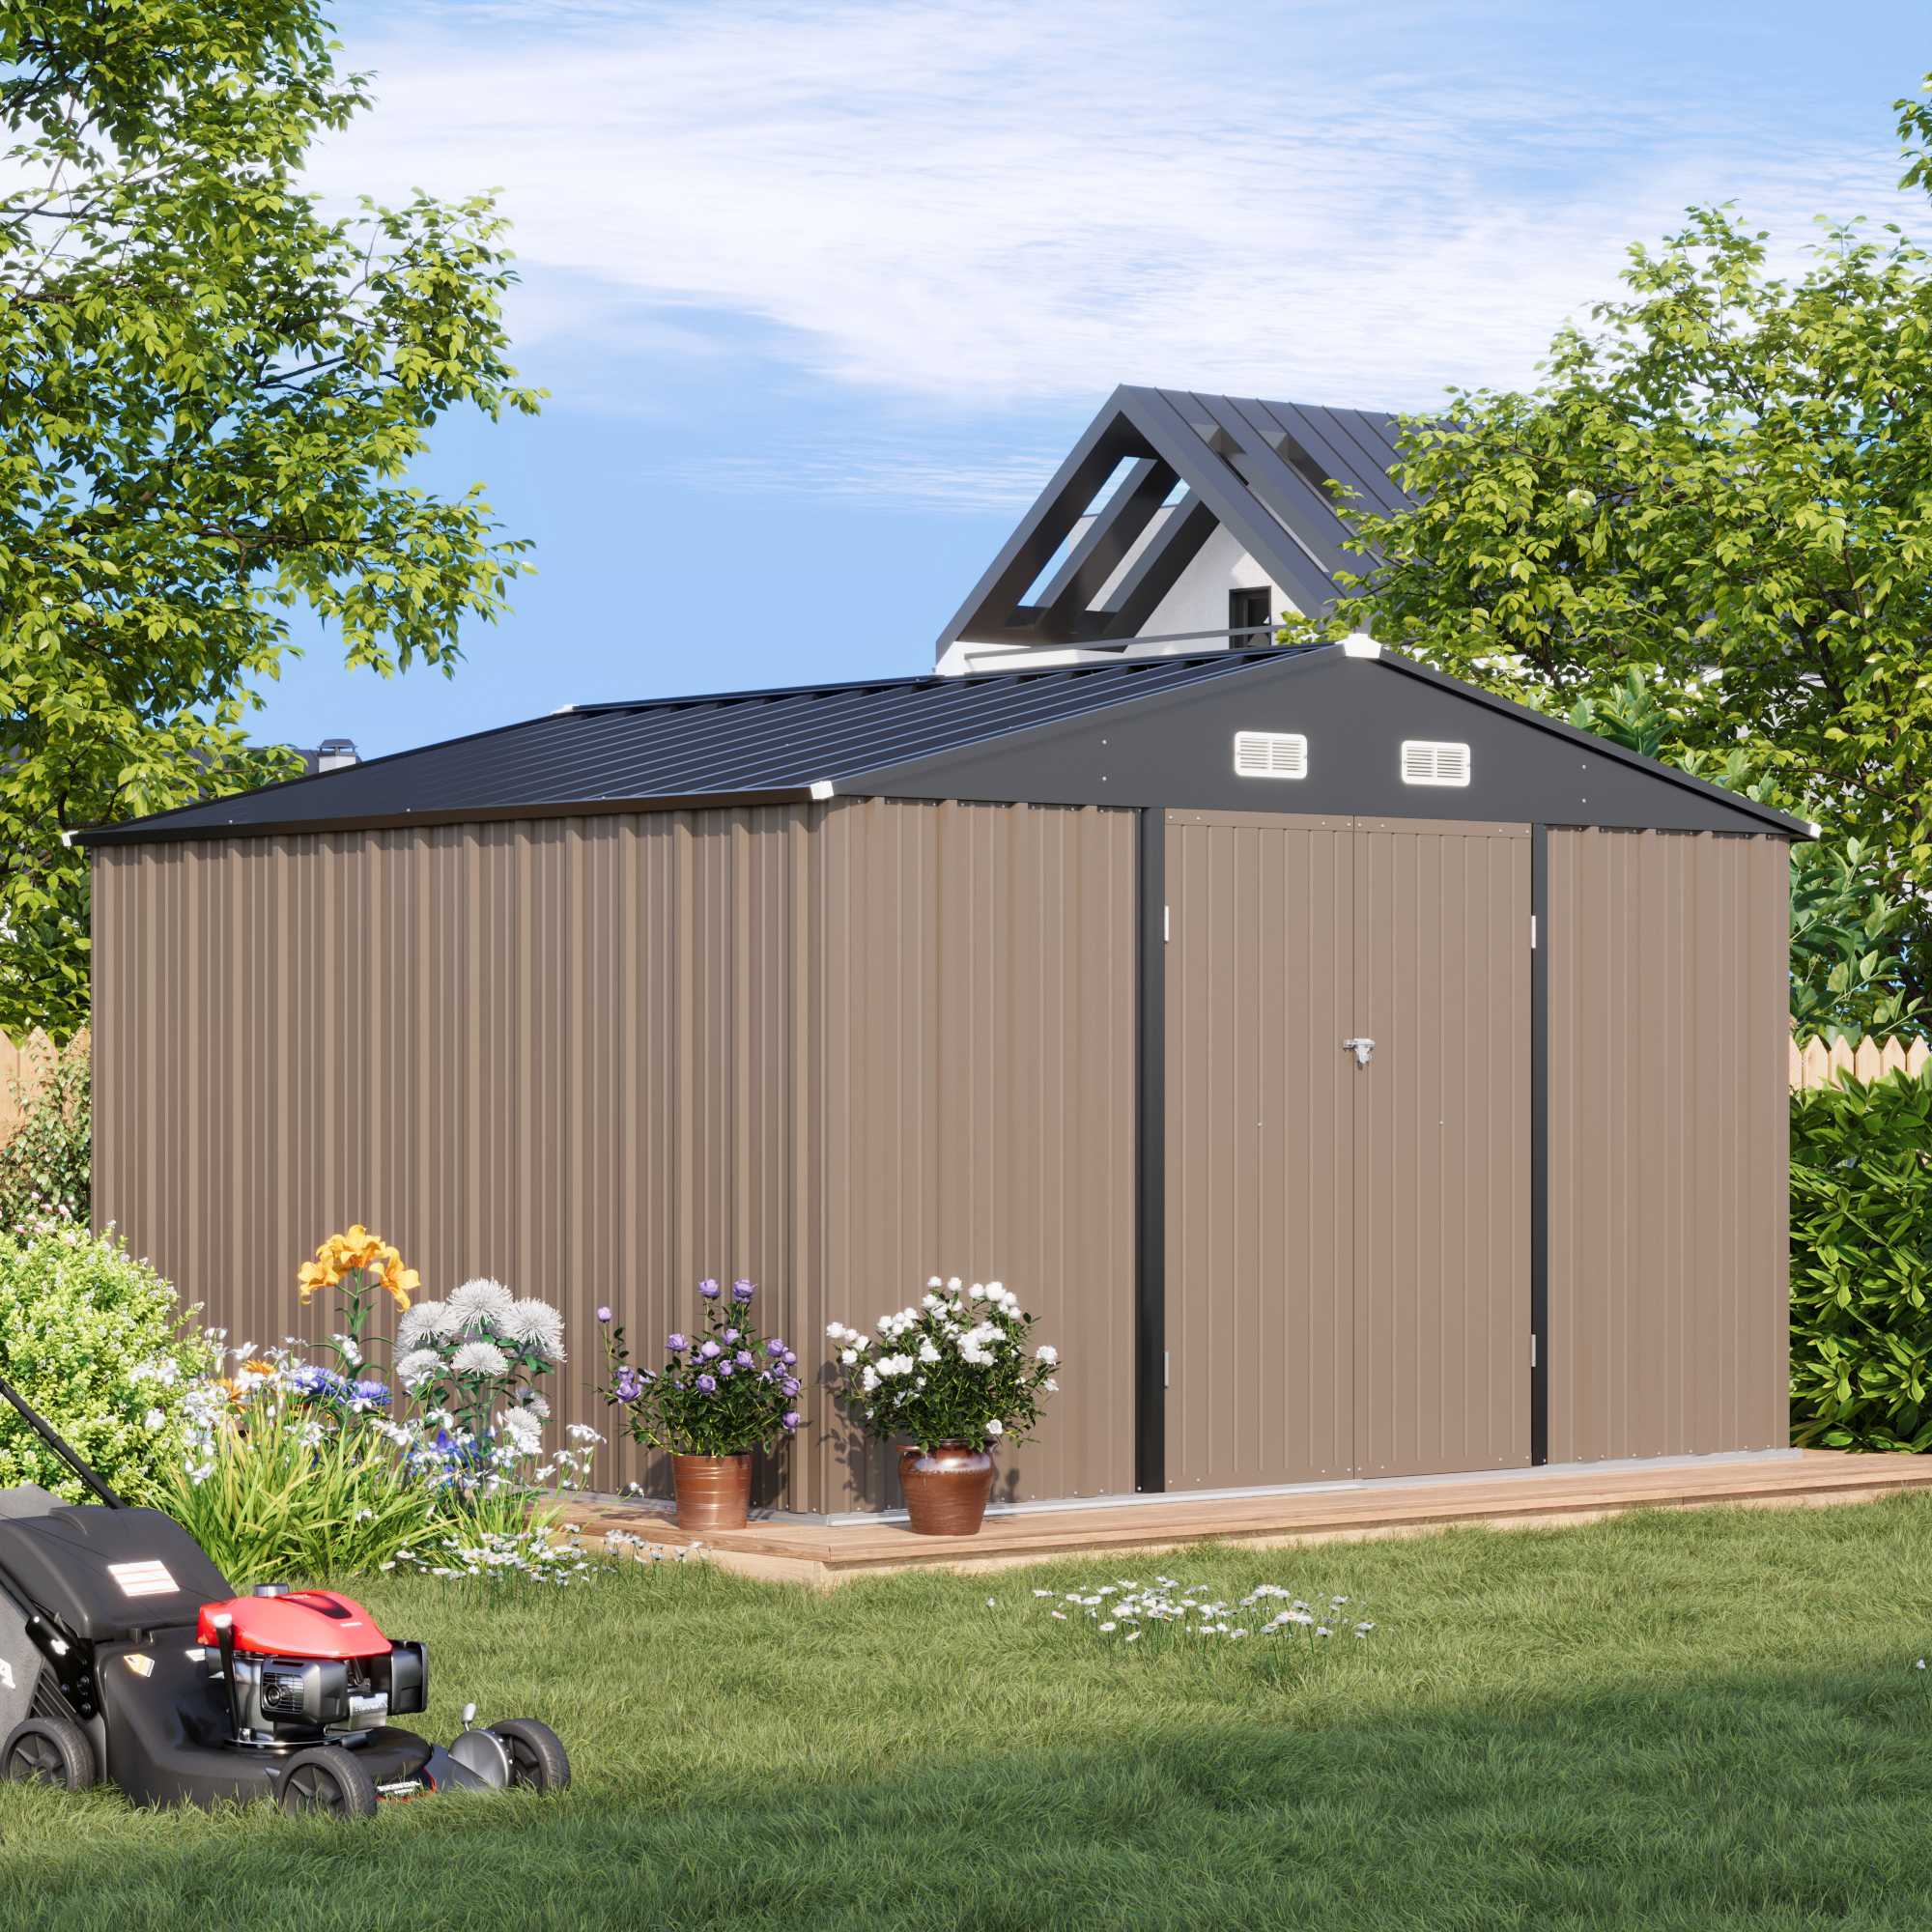 Patiowell Size Upgrade 10 x 10 ft Outdoor Storage Metal Shed with Sloping Roof and Double Lockable Door, Brown - image 2 of 7